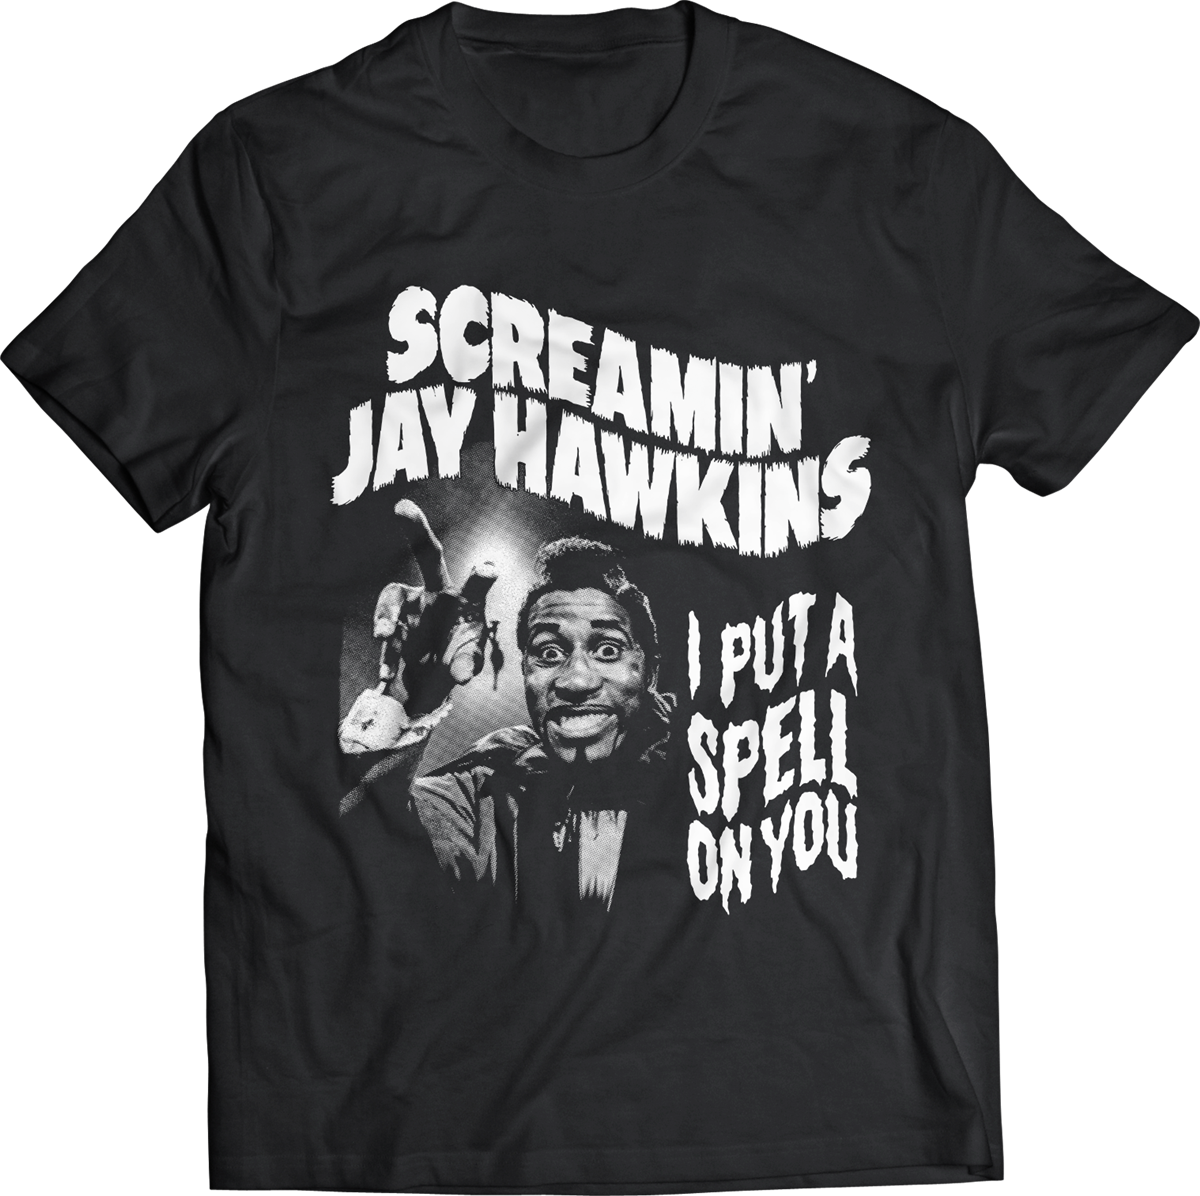 men's sizing black cotton t-shirt with white screenprint "Screamin' Jay Hawkins" and "I put a spell on you" text and photographic portrait on front, shown flatlay